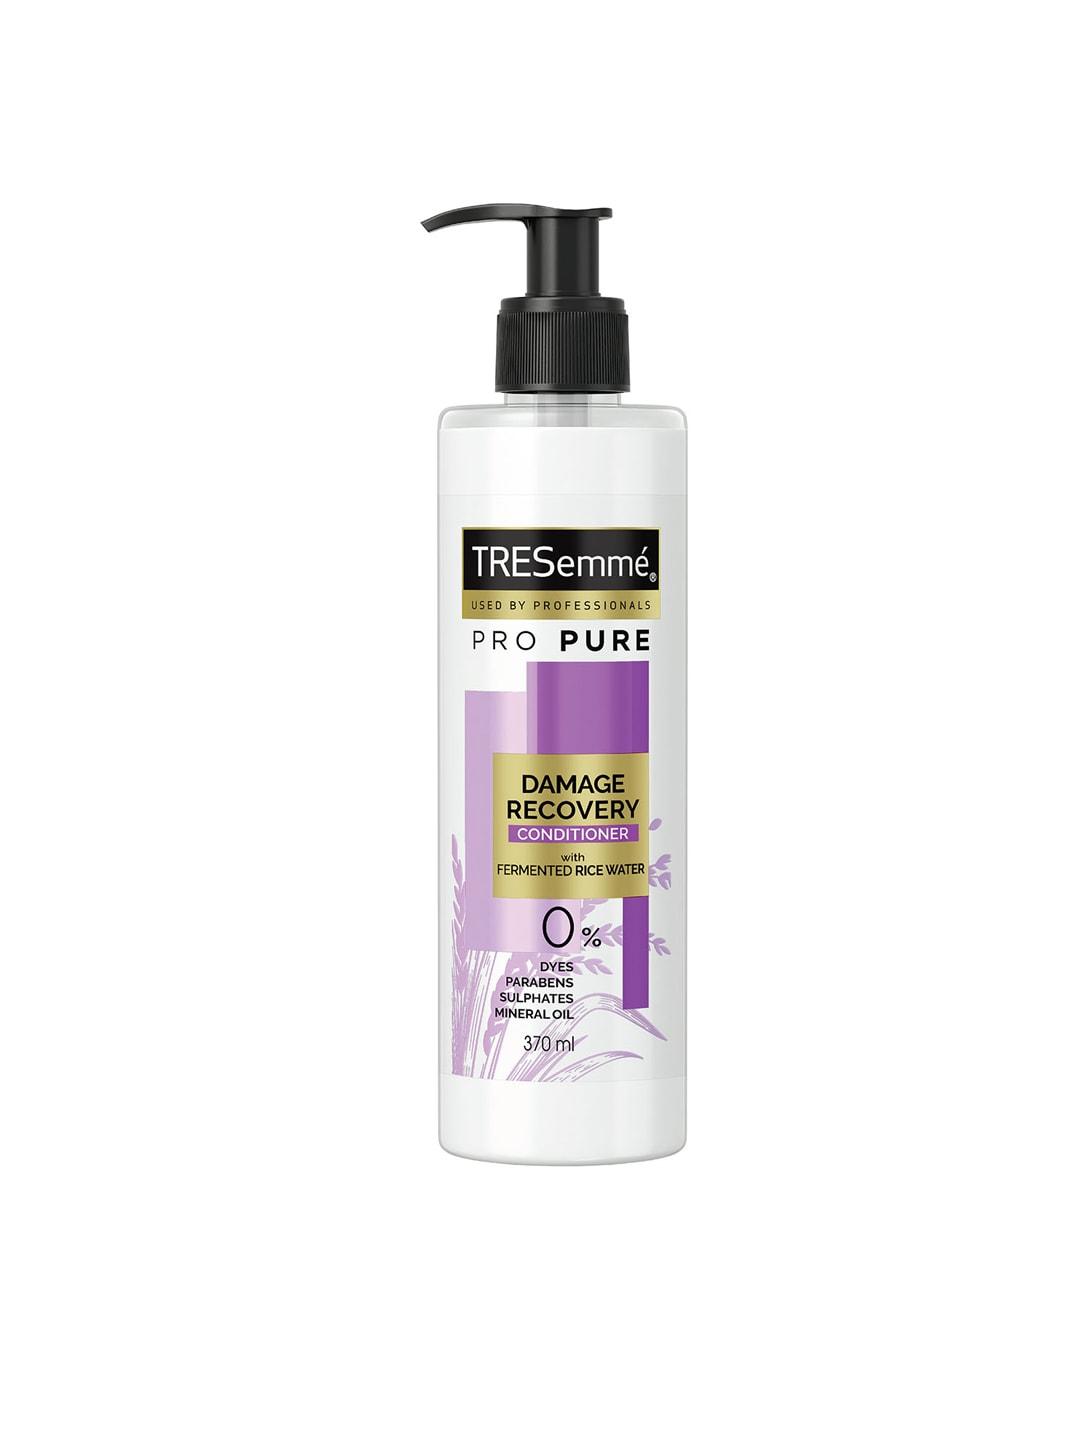 TRESemme ProPure Damage Recovery Conditioner with Fermented Rice Water - 390 ml